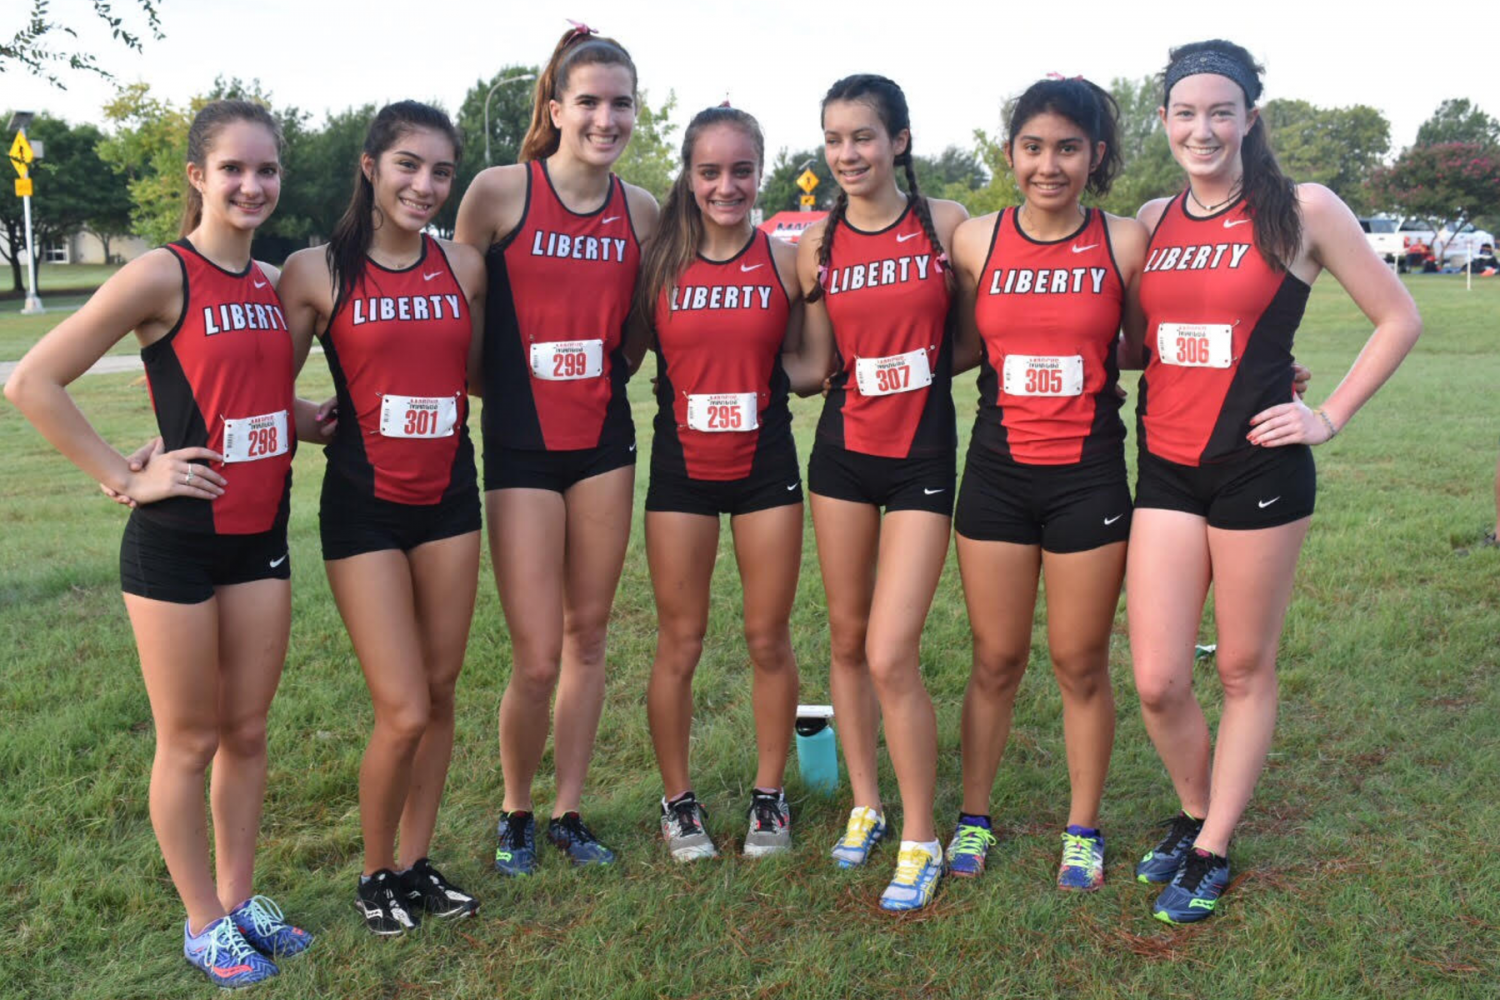 Second+from+the+right%2C+Ruiz++smiles+for+a+picture+with+the+cross+country+team+at+a+meet.